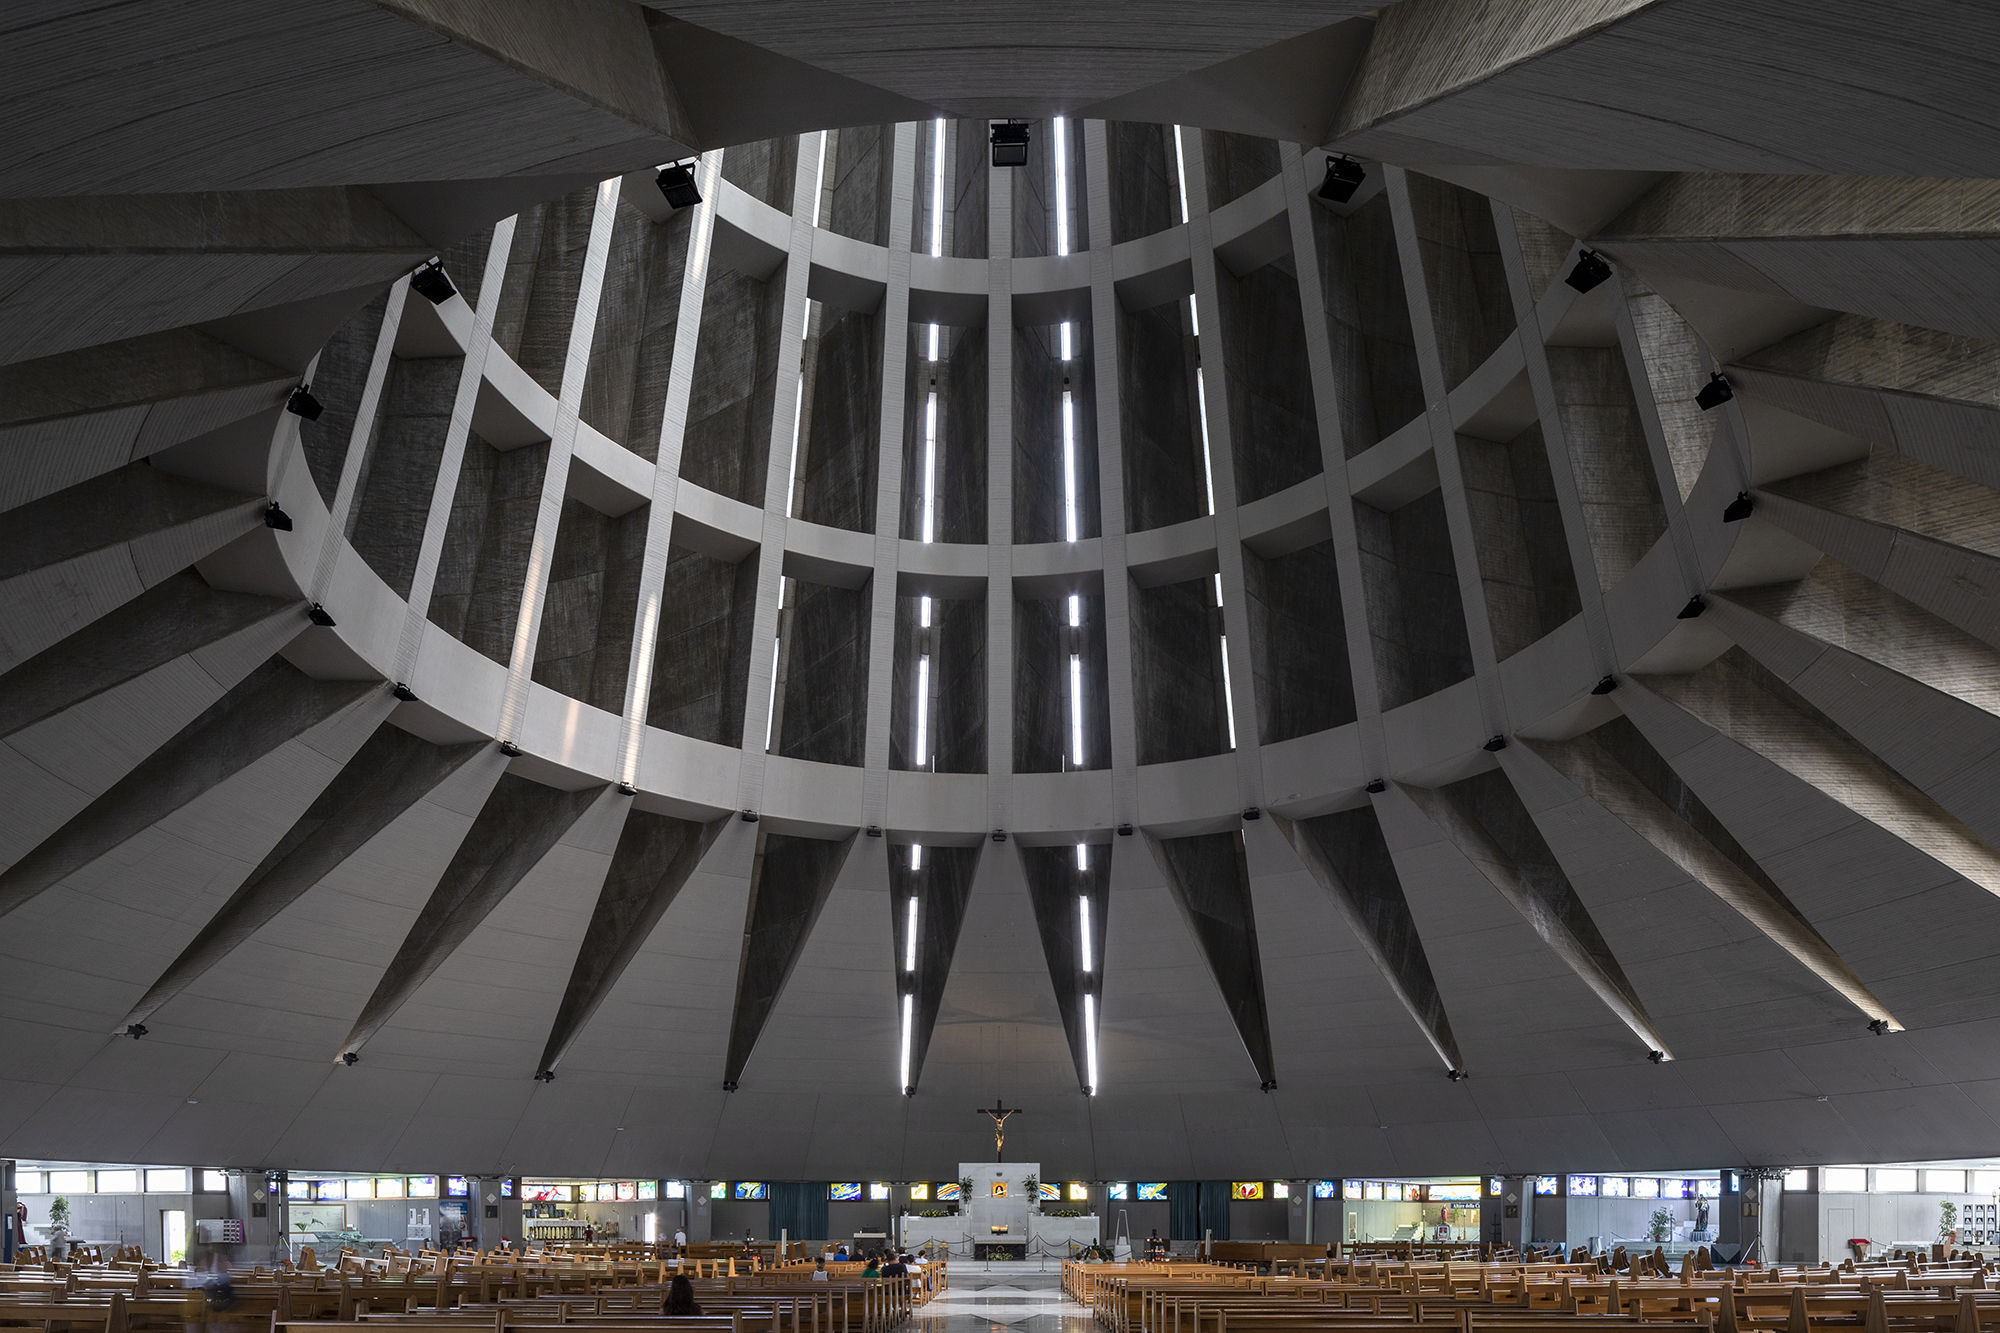 Our Lady of Tears Sanctuary, Syracuse. Michel Andrault, Pierre Parat (1966-1994) | image by Roberto Conte